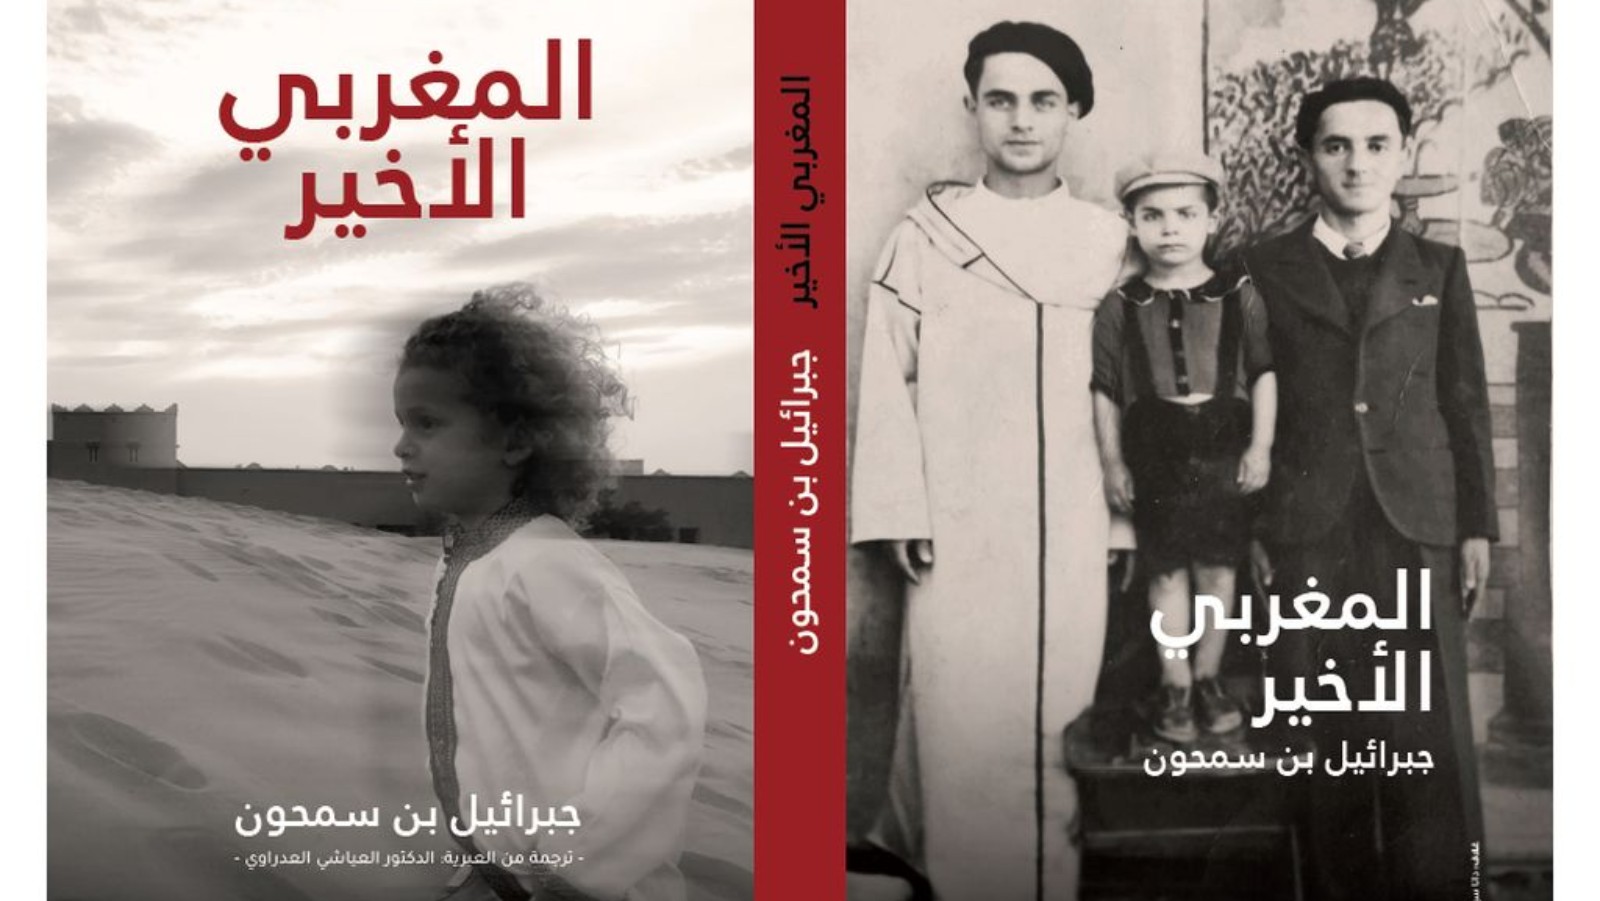 “A Girl in a Blue Shirt” by Prof. Bensimhon, translated into Moroccan Arabic. Photo courtesy of Tel Aviv University